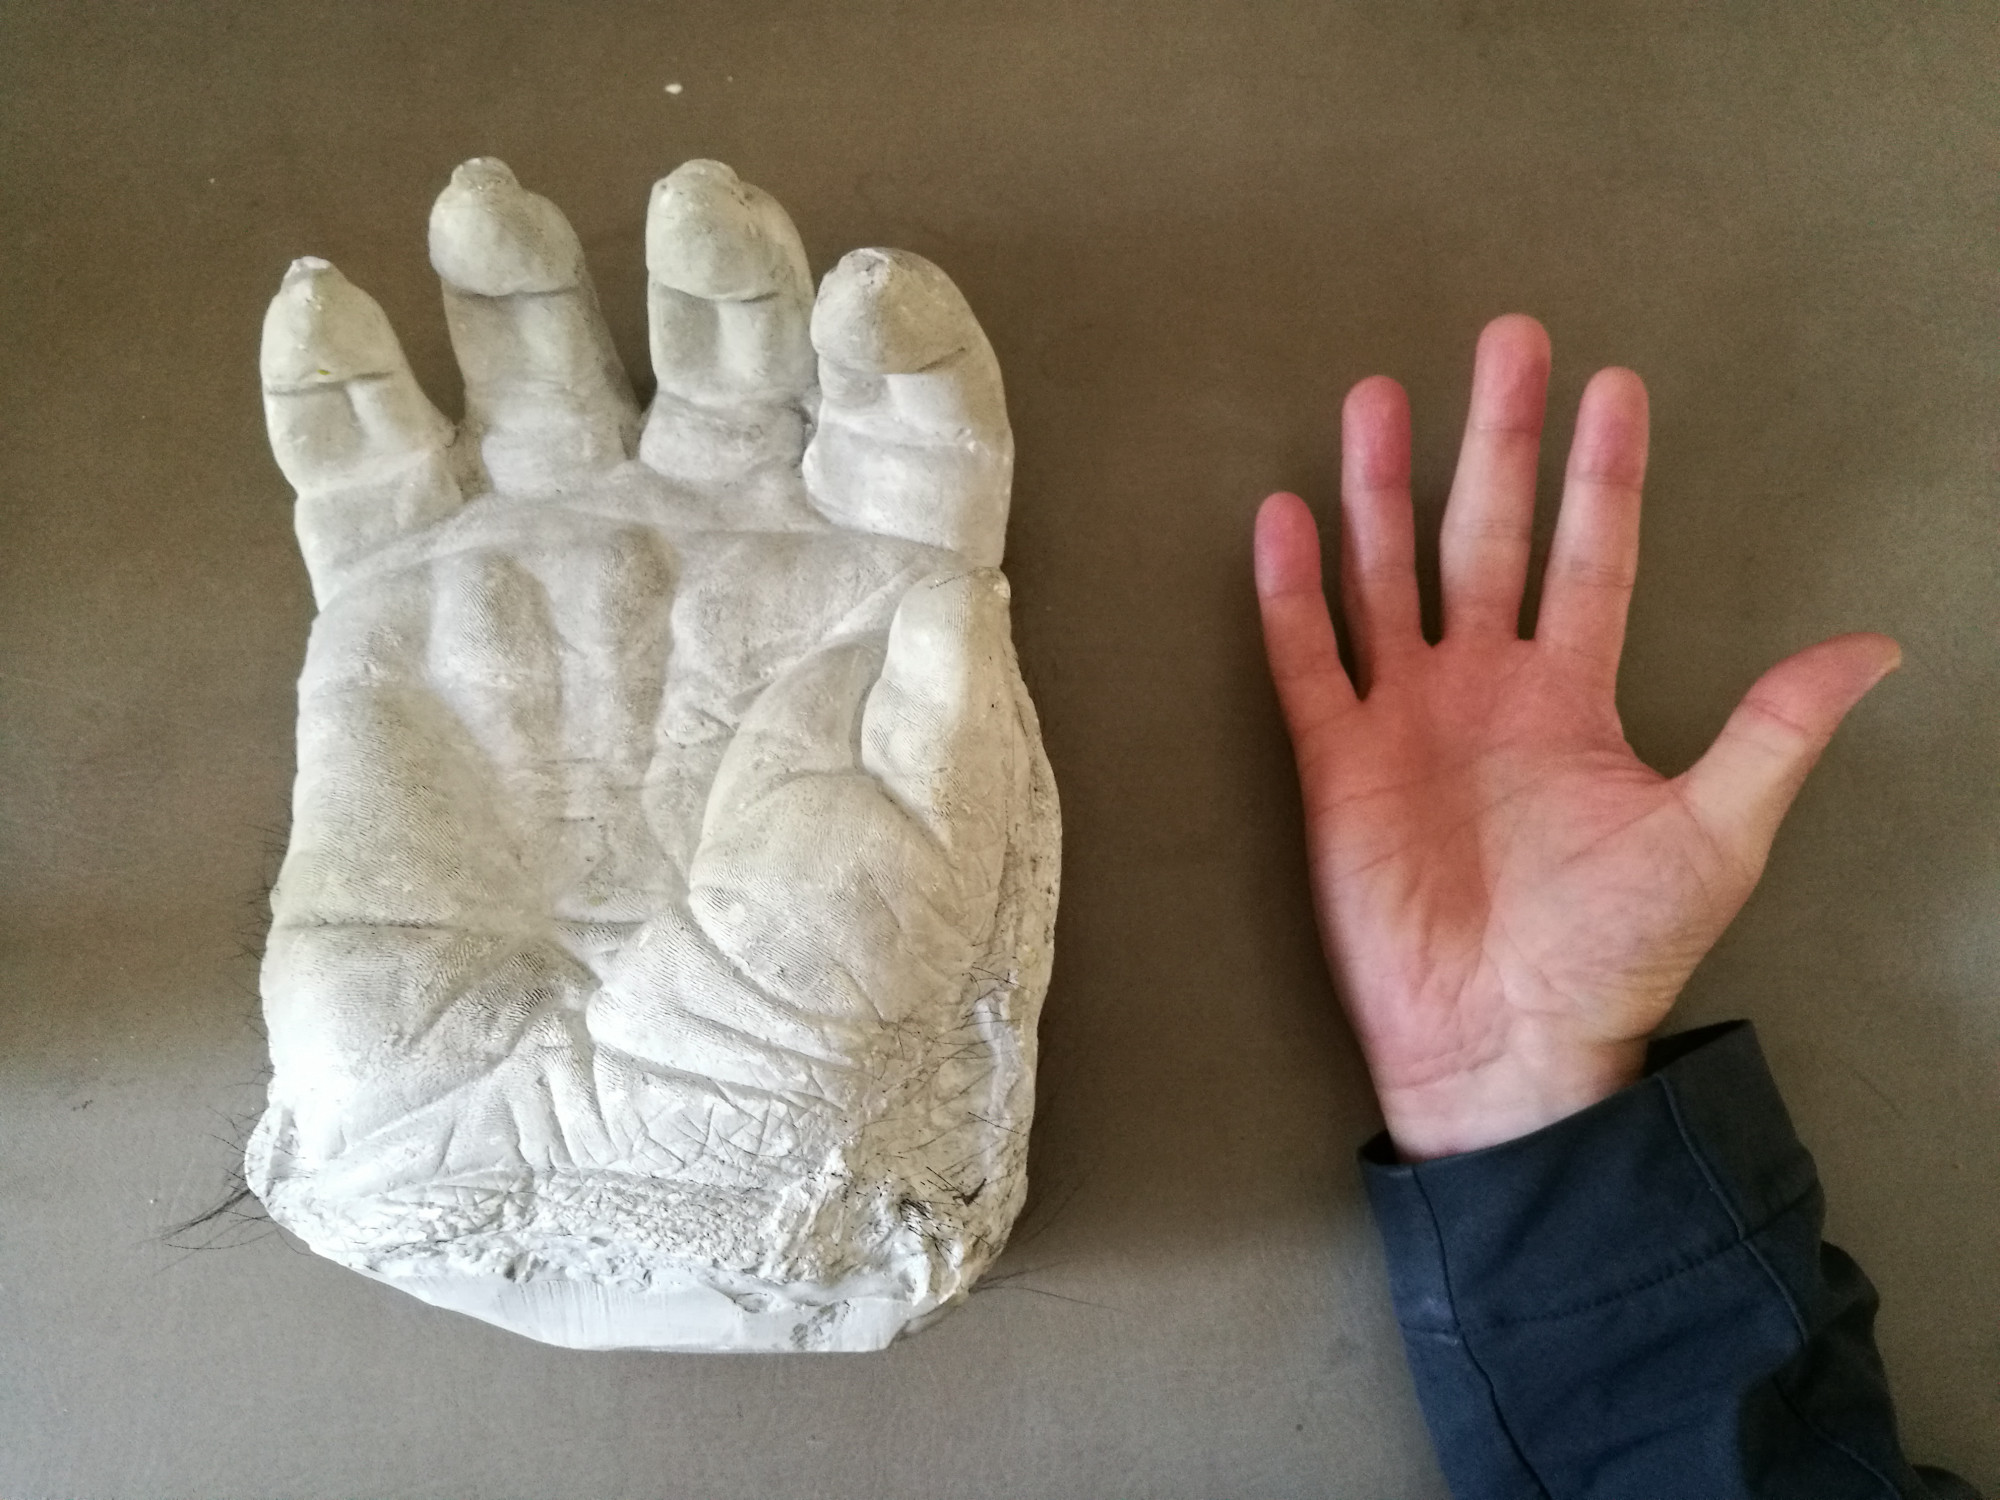 Cast of "Bobby" the gorilla's hand from above with a human hand held next to it.